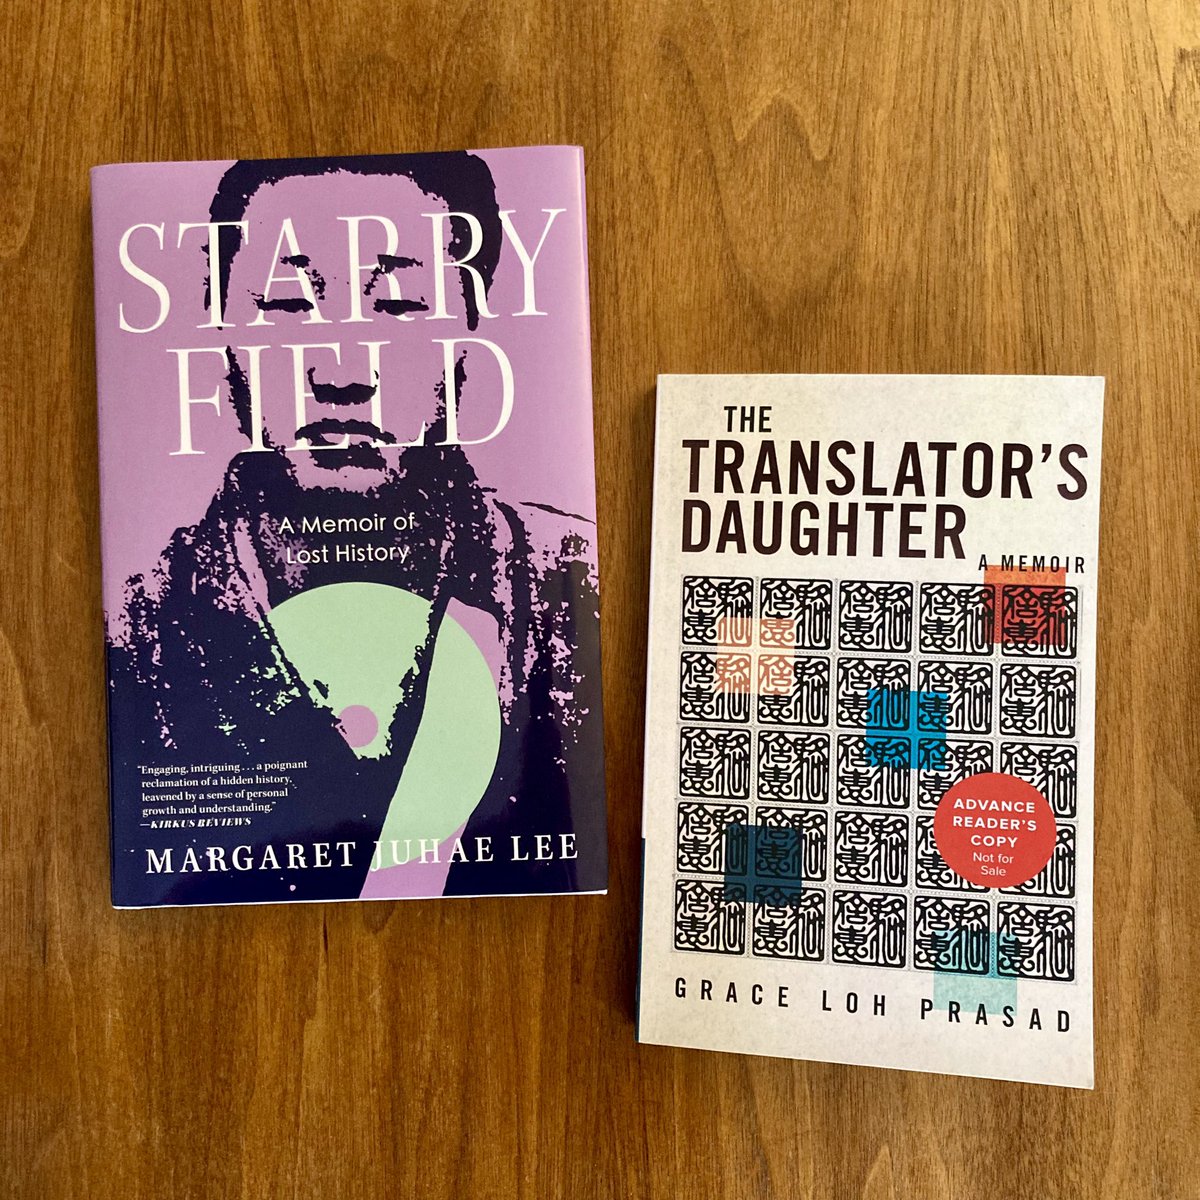 Happiest of pub days to @margaretjuhae’s Starry Field and @GraceLP’s The Translator’s Daughter, memoirs about the search for family history, home, and belonging.